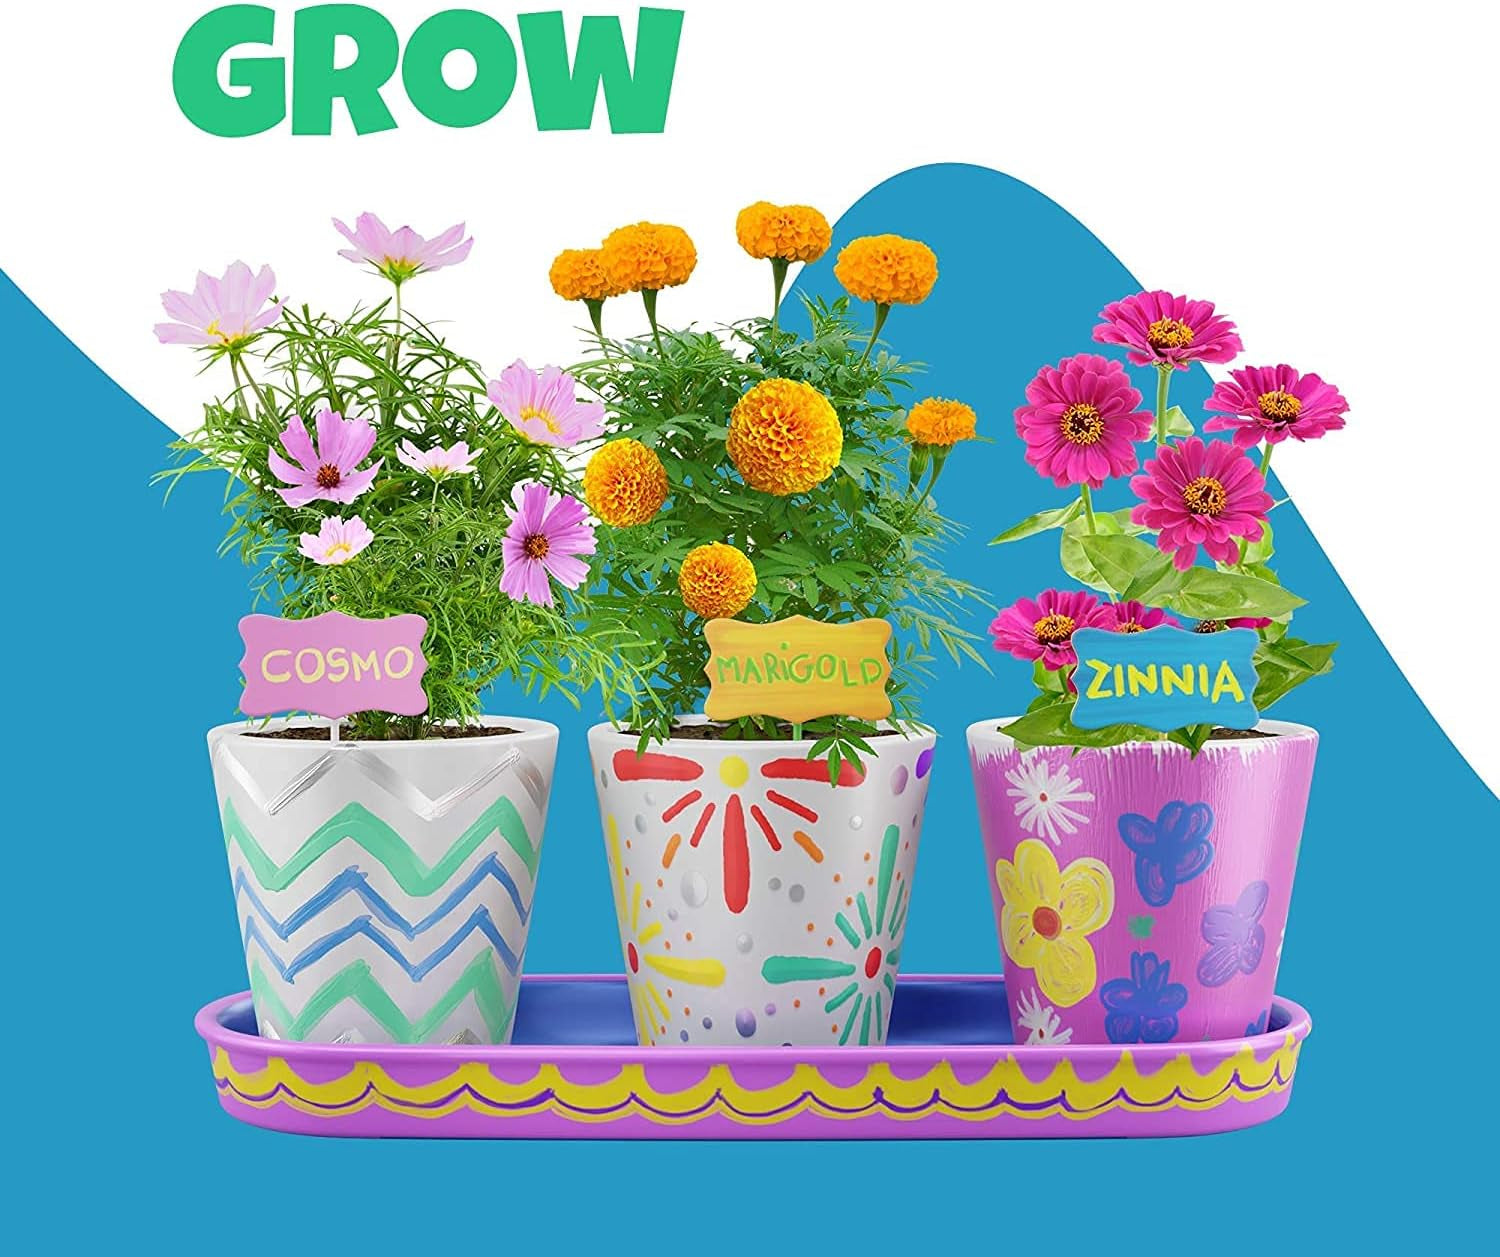 Paint & Plant Stoneware Flower Gardening Kit - Easter Gifts for Girls & Boys Ages 6-12 - Kids Arts & Crafts Project Birthday Gift, STEM Activity for Age 6, 7, 8, 9, 10, 11 & 12 Year Old Girl